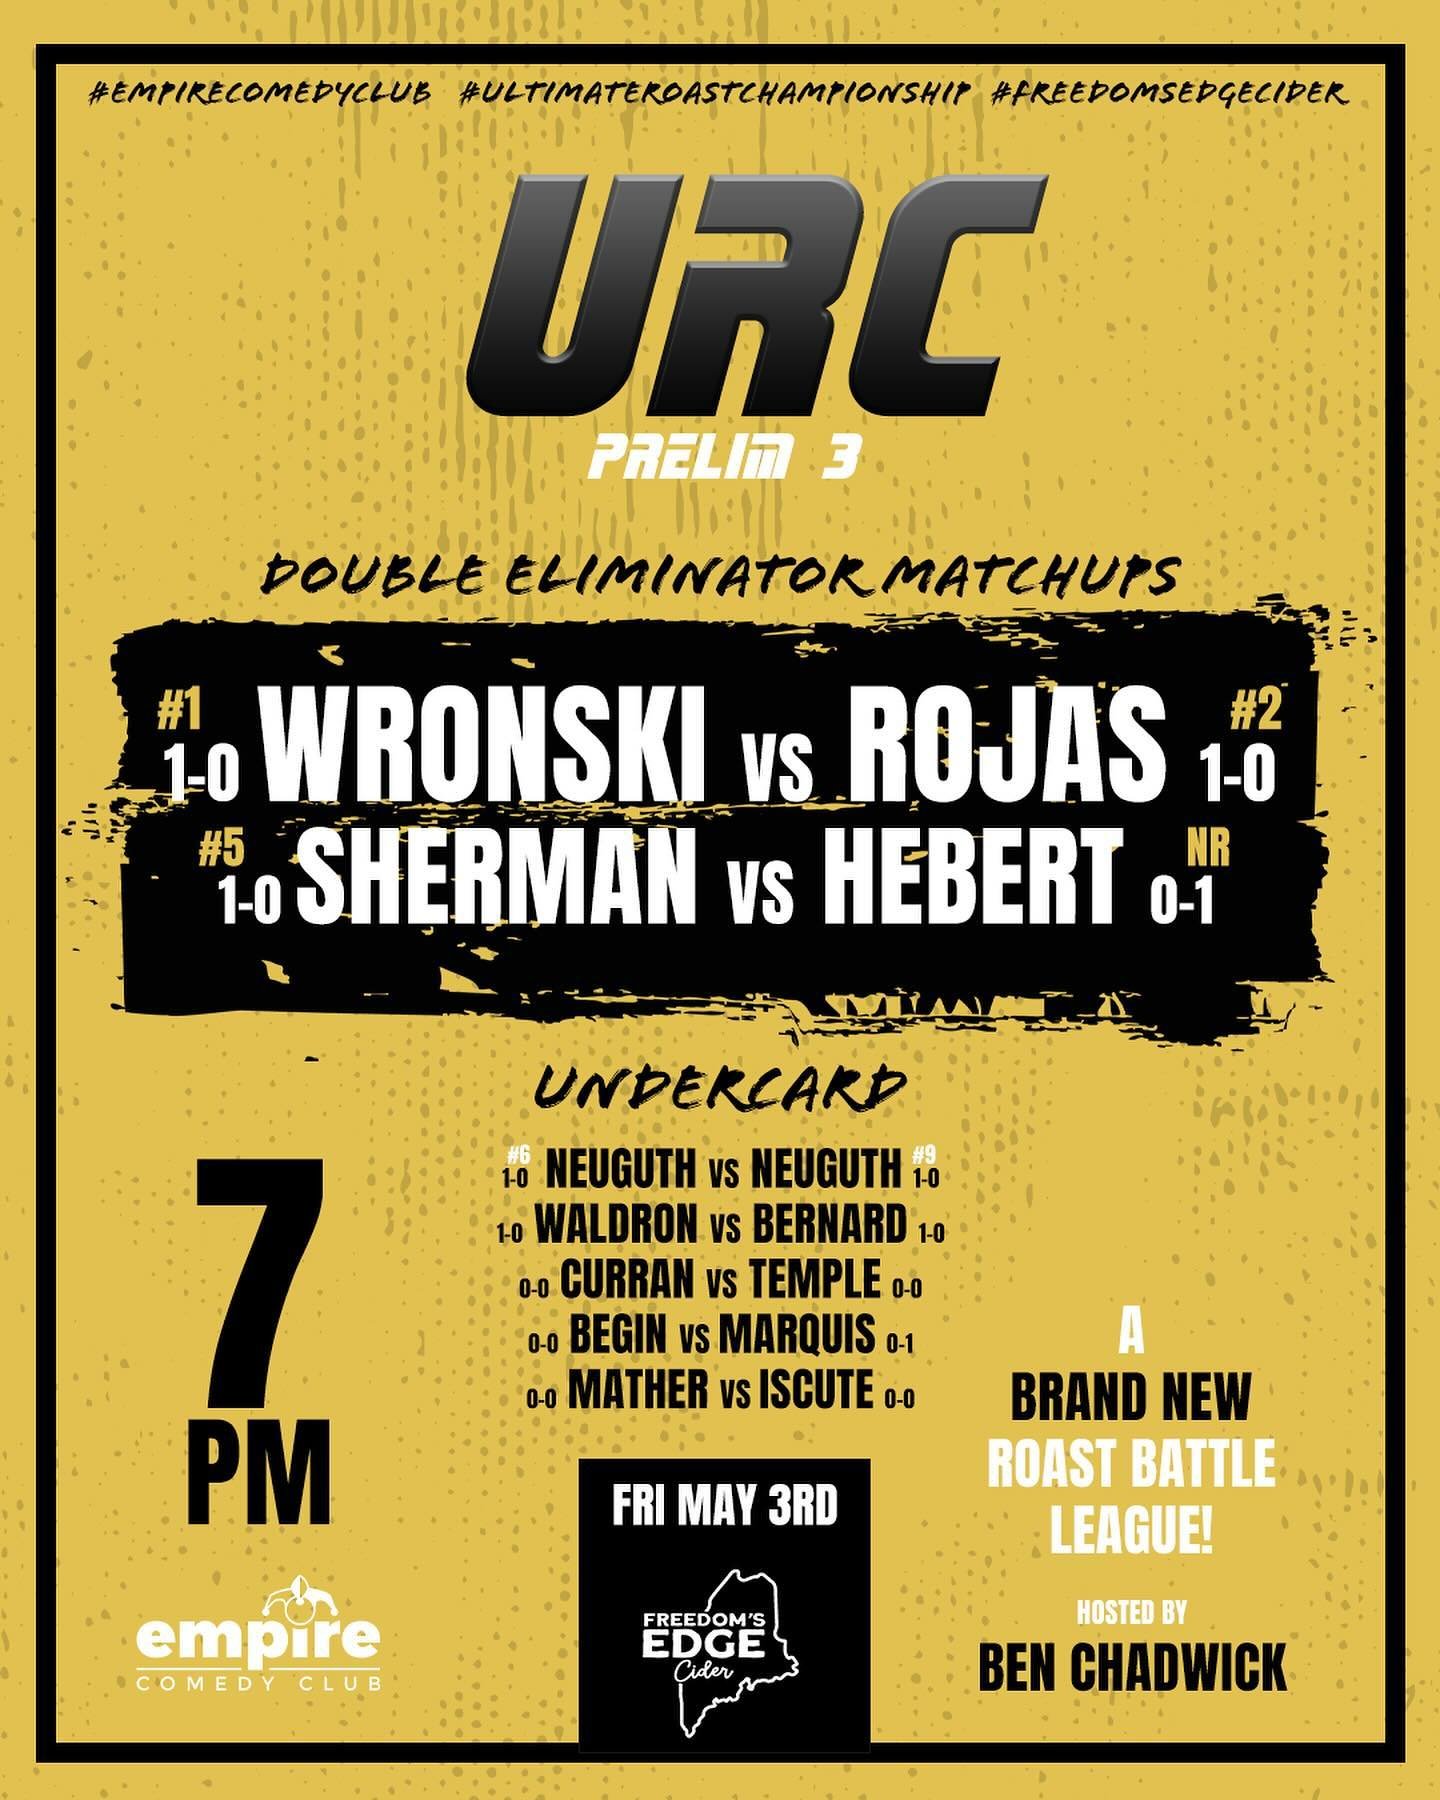 TONIGHT - FRIDAY, MAY 3RD! URC (Roast Battle League) at 7pm, doors at 6pm, followed by Jeff Leeson at 9:30pm, doors at 9! Get your tickets at empirecomedyme.com, or the link in our bio. 🎟️
&bull;
#empirecomedyclub #comedyclub #maine #portlandmaine #